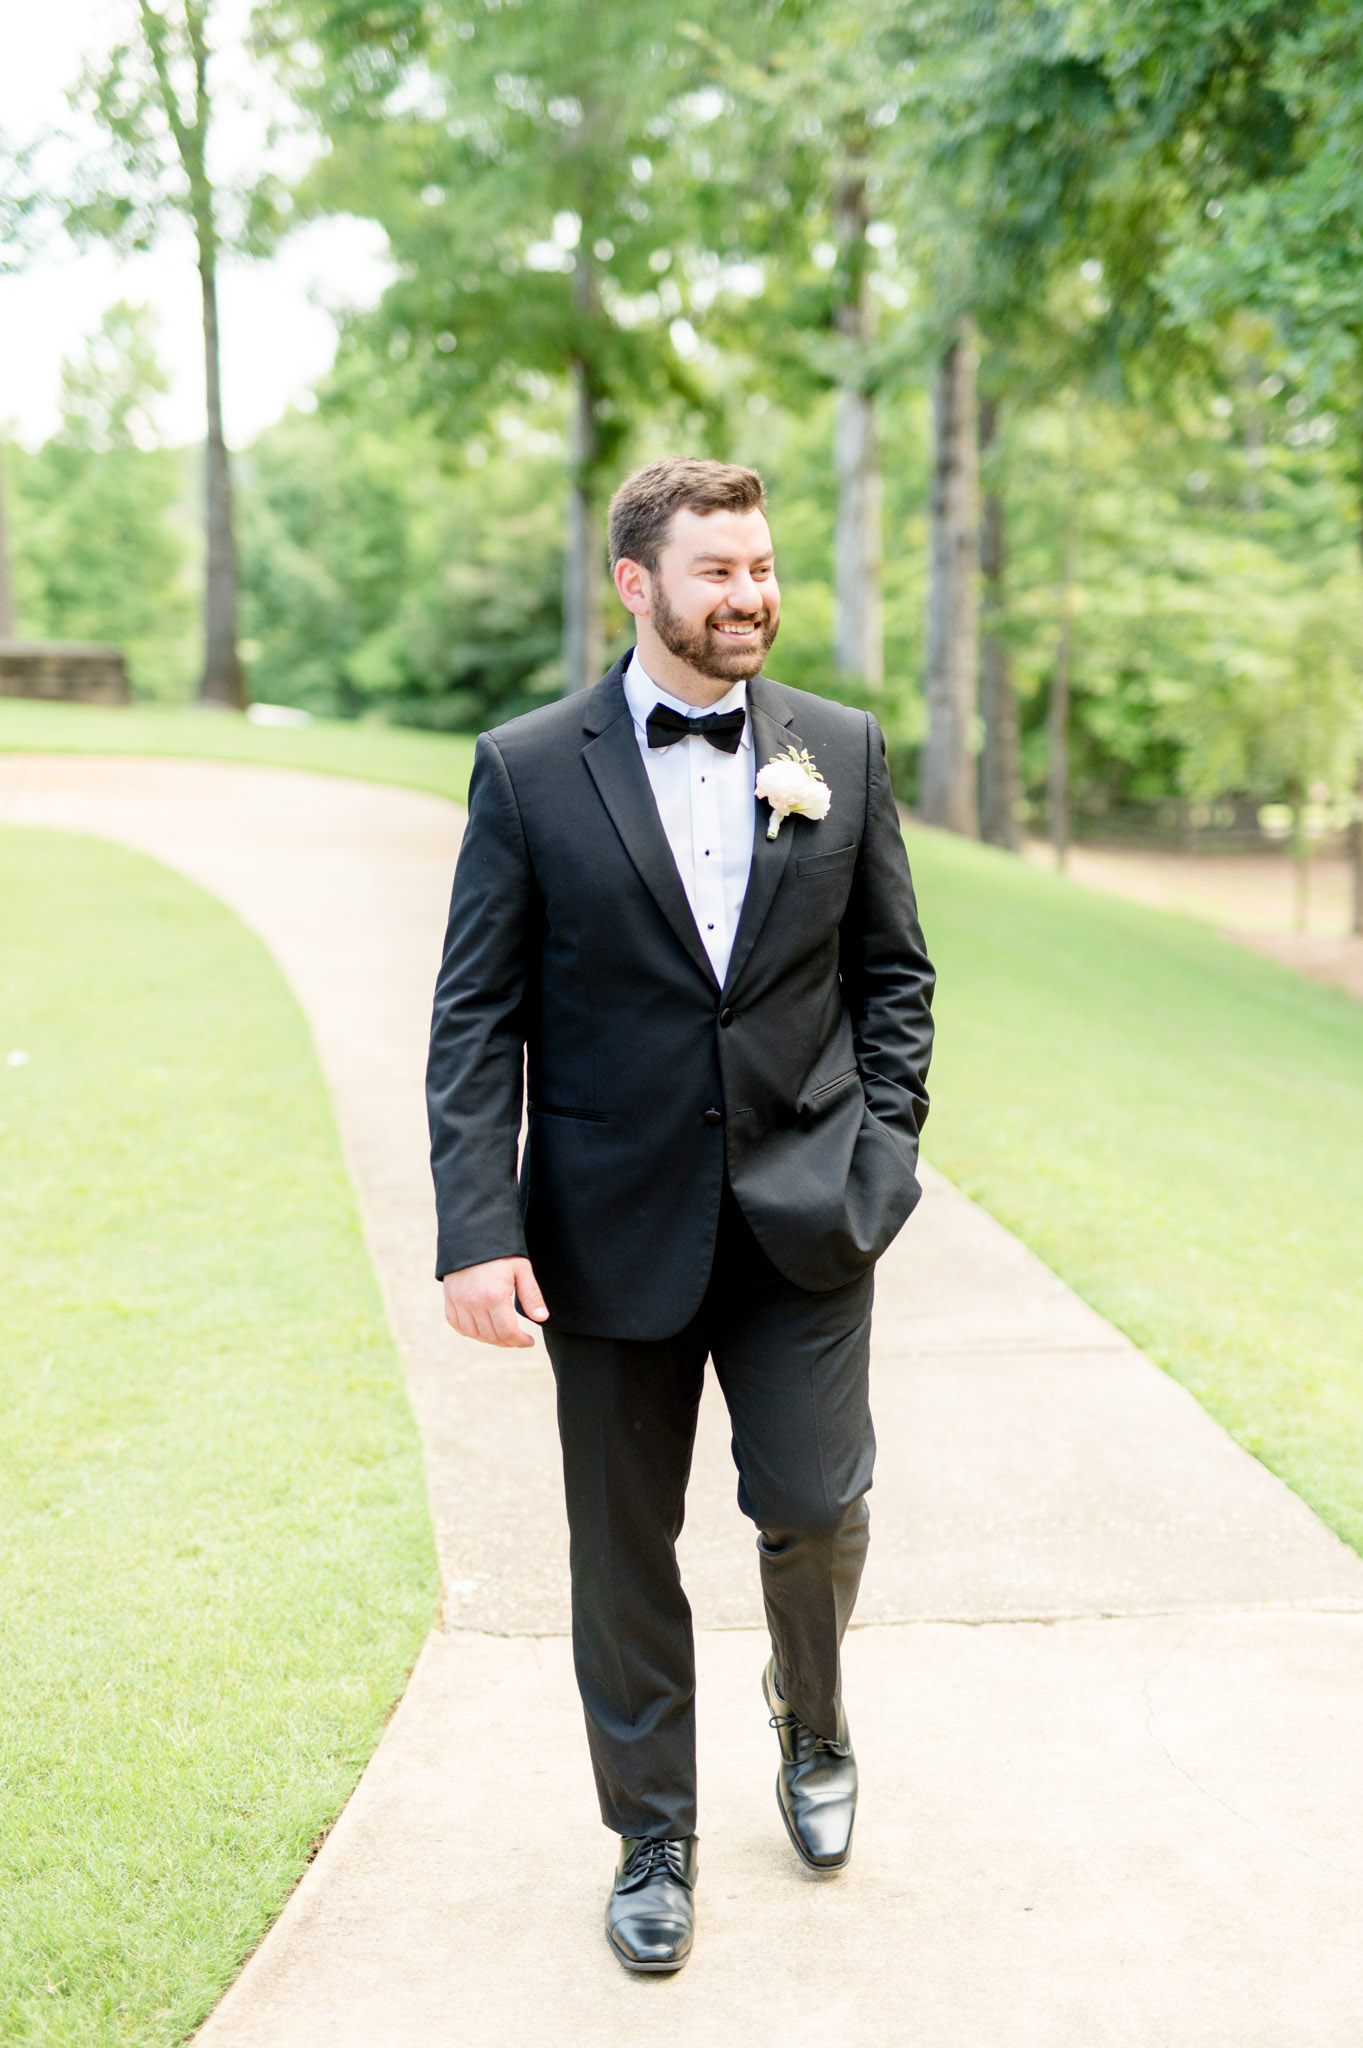 Groom walks down path and laughs.